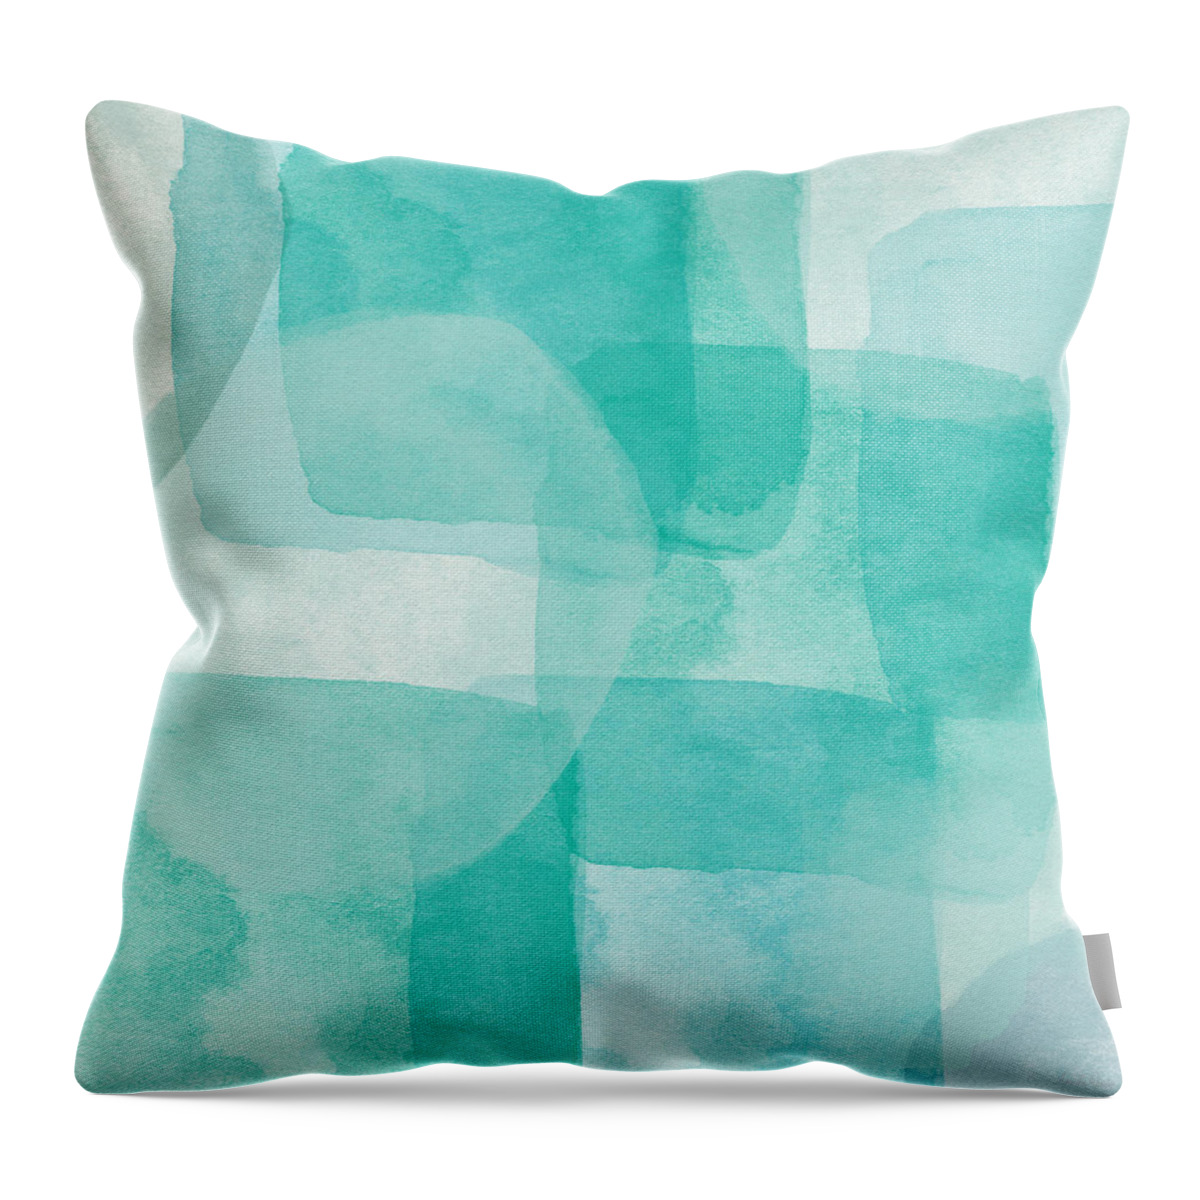 Abstract Throw Pillow featuring the painting Beach Glass- Abstract Art by Linda Woods by Linda Woods